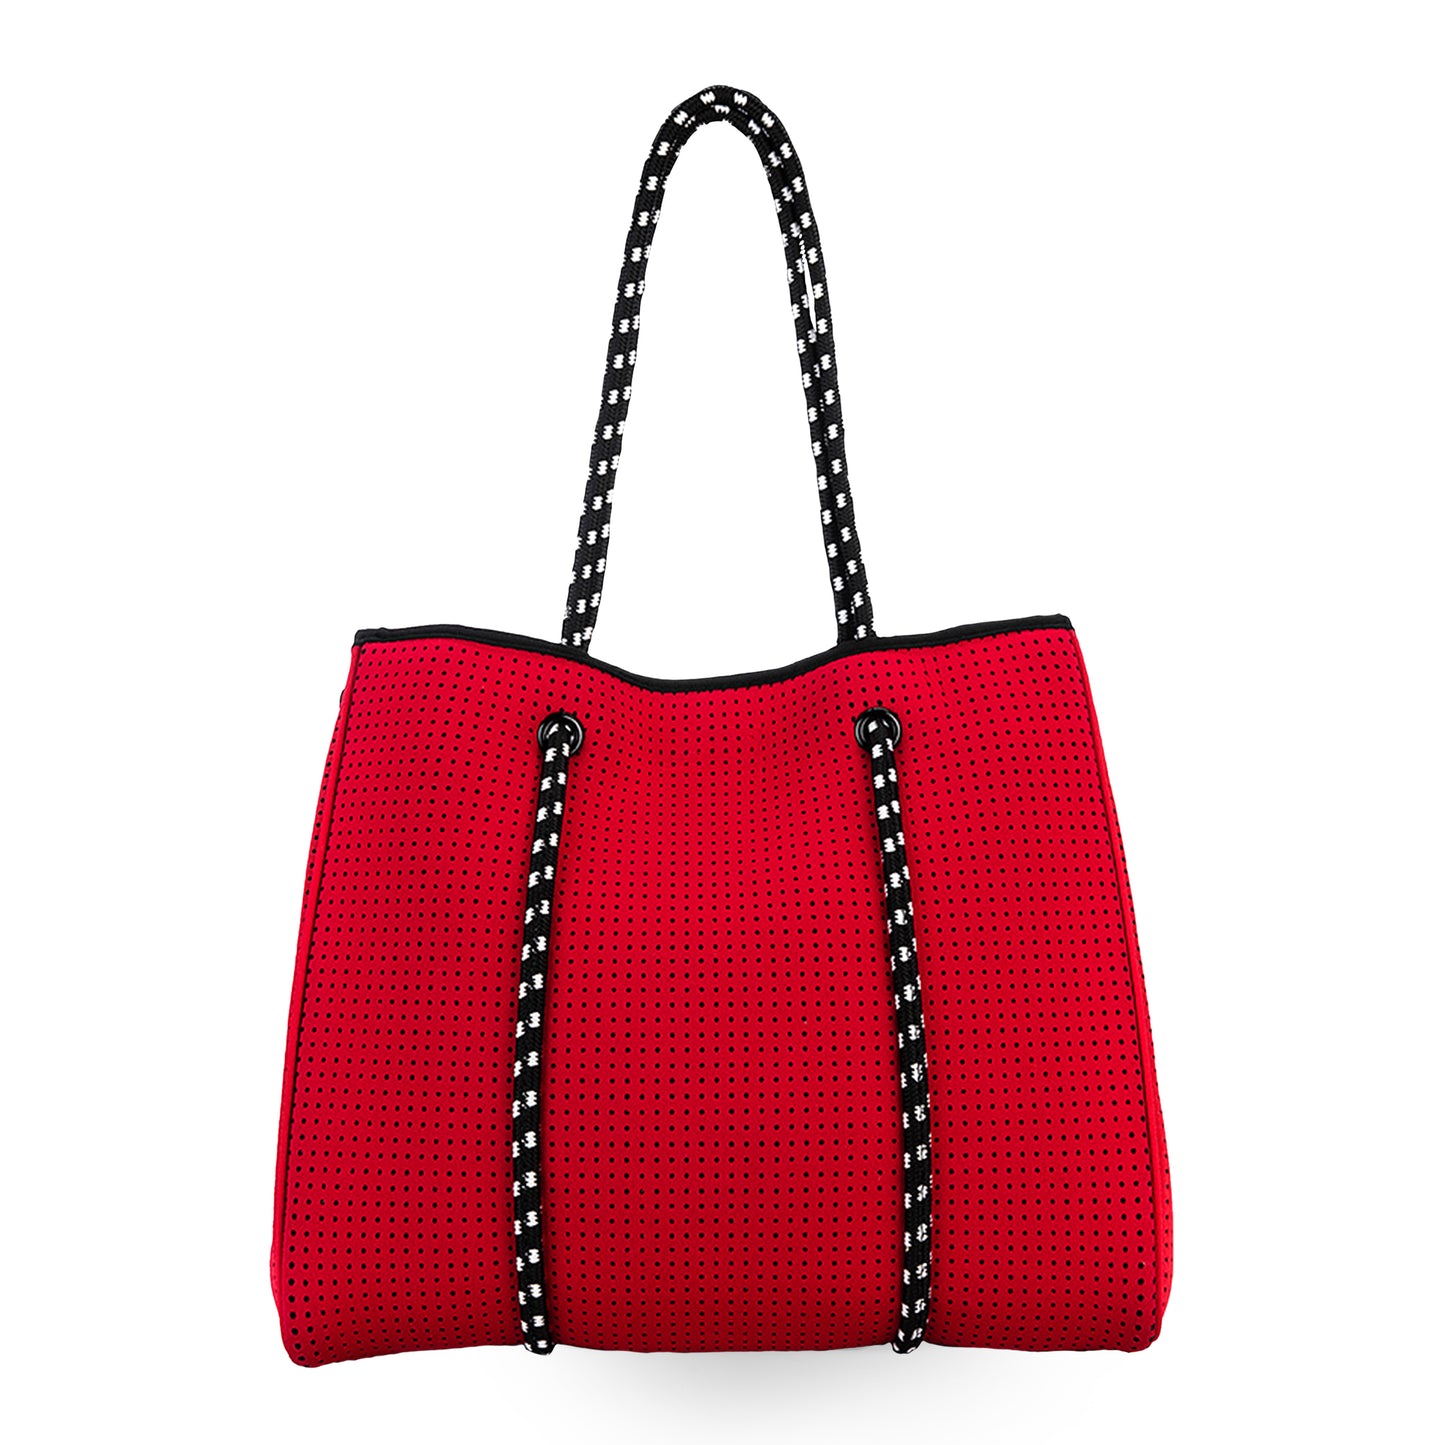 Classic Tote Bag - Coral Red